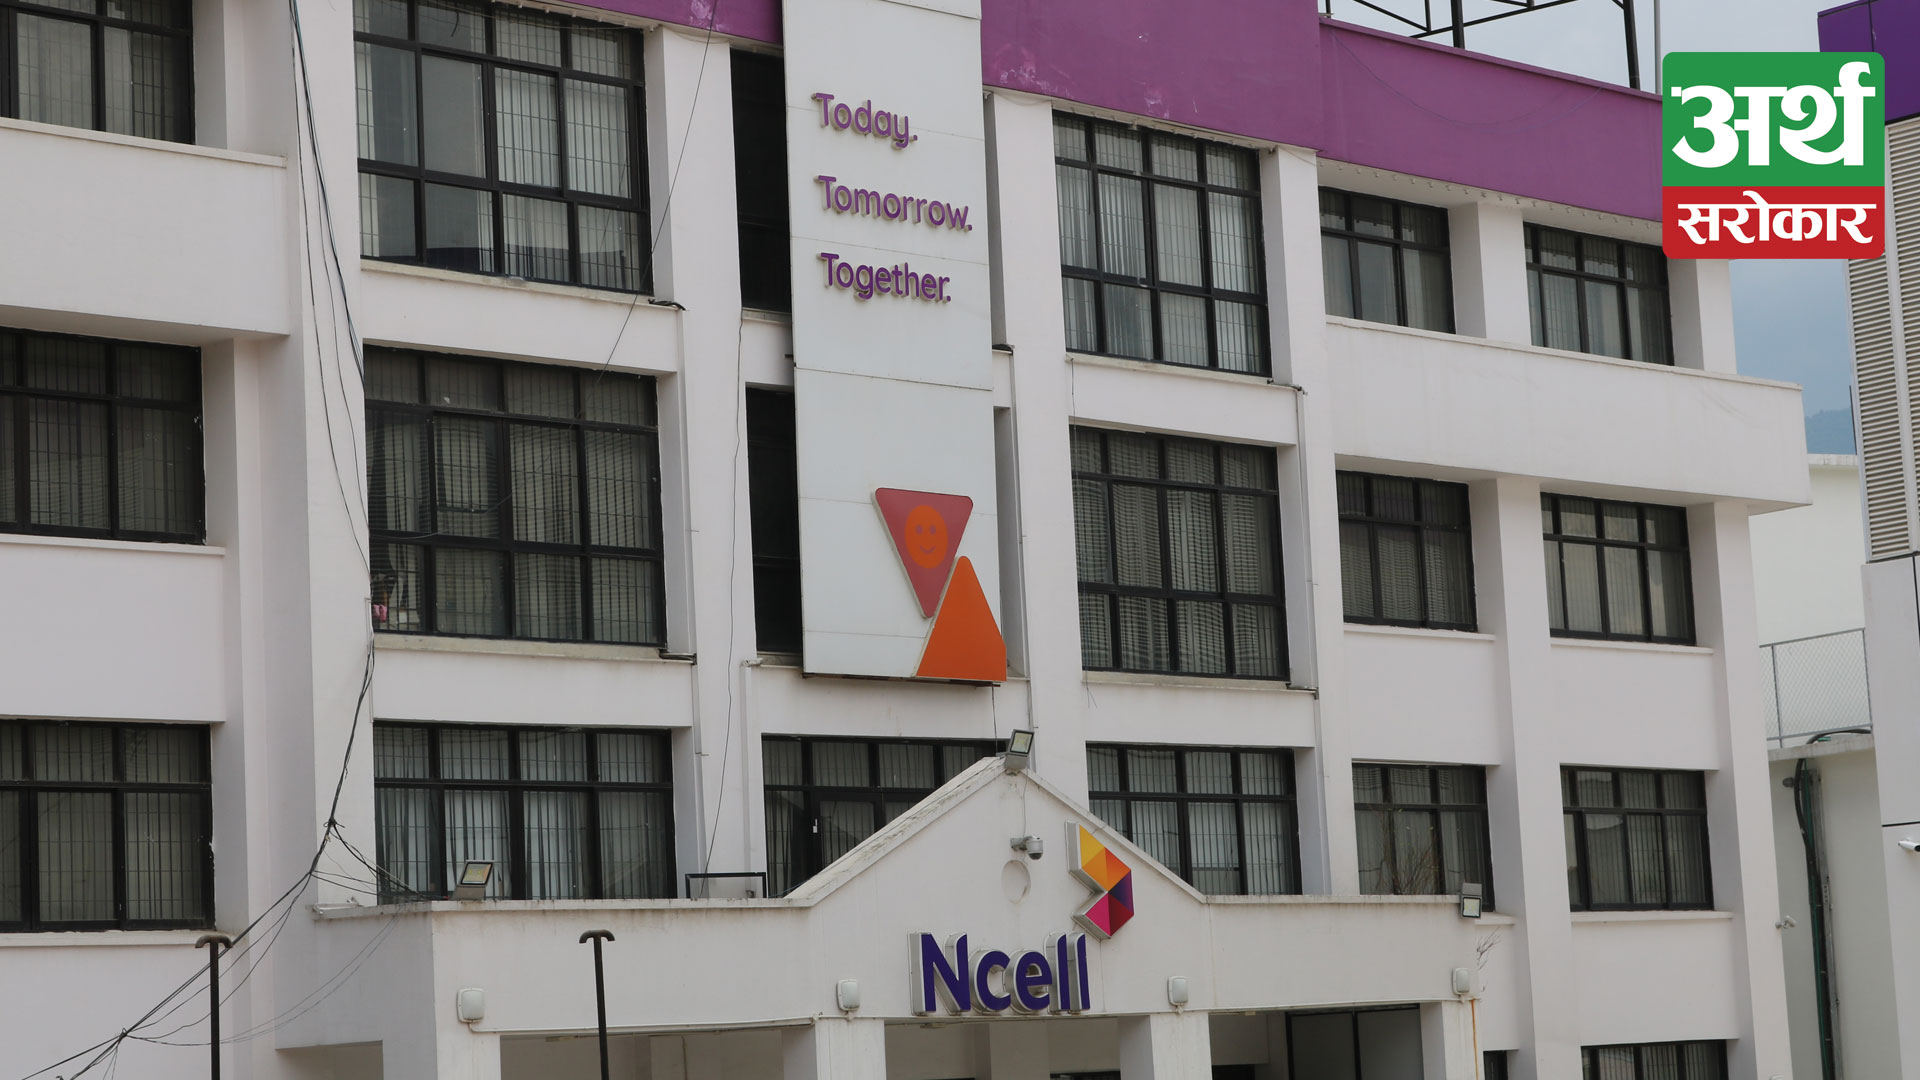 Ncell App: Customers’ digital journey simplified